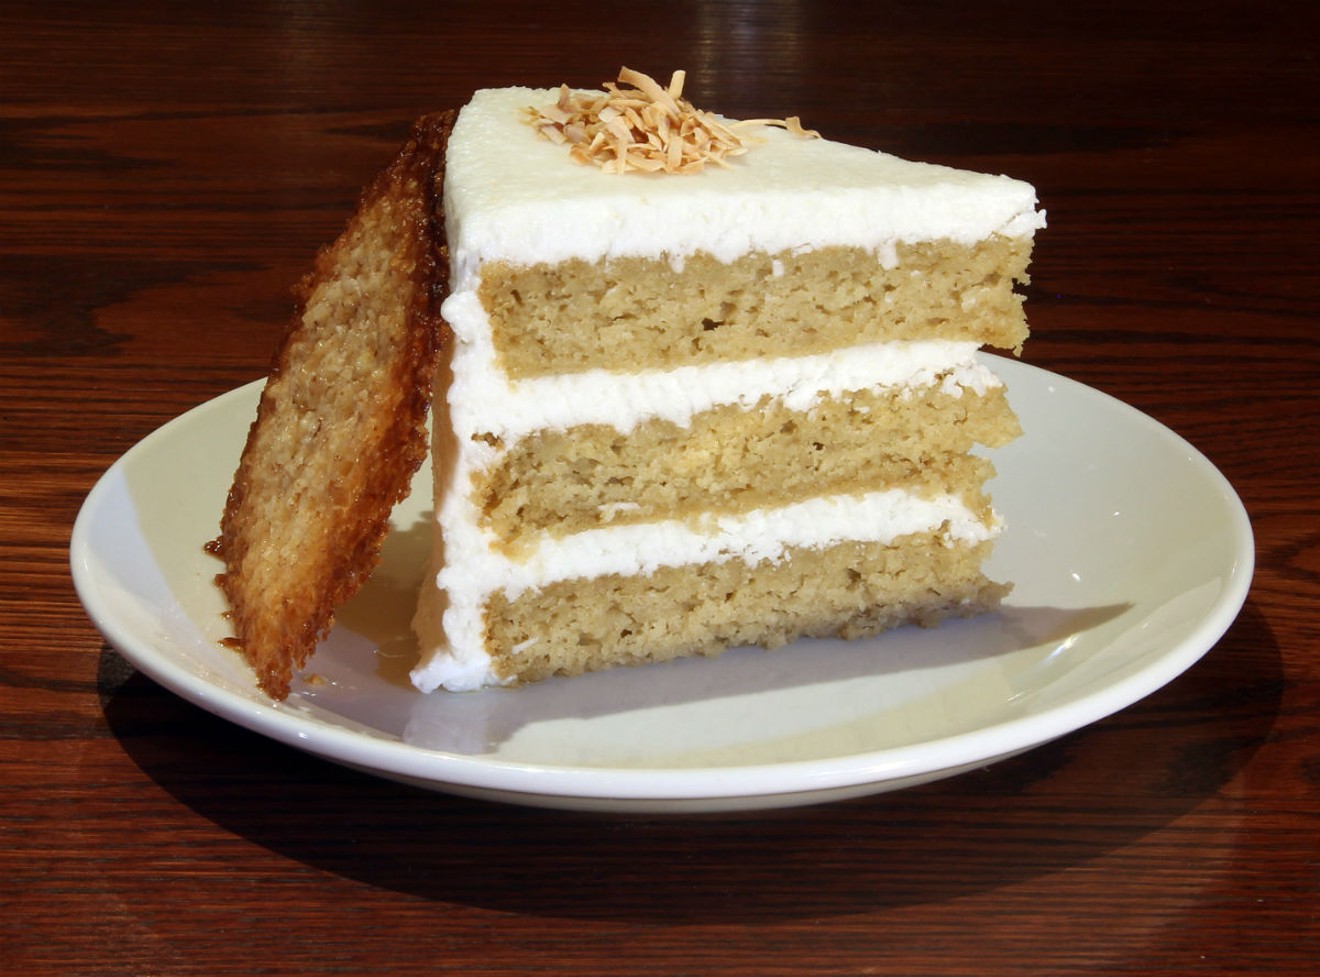 Sublime's three-layer coconut cake.